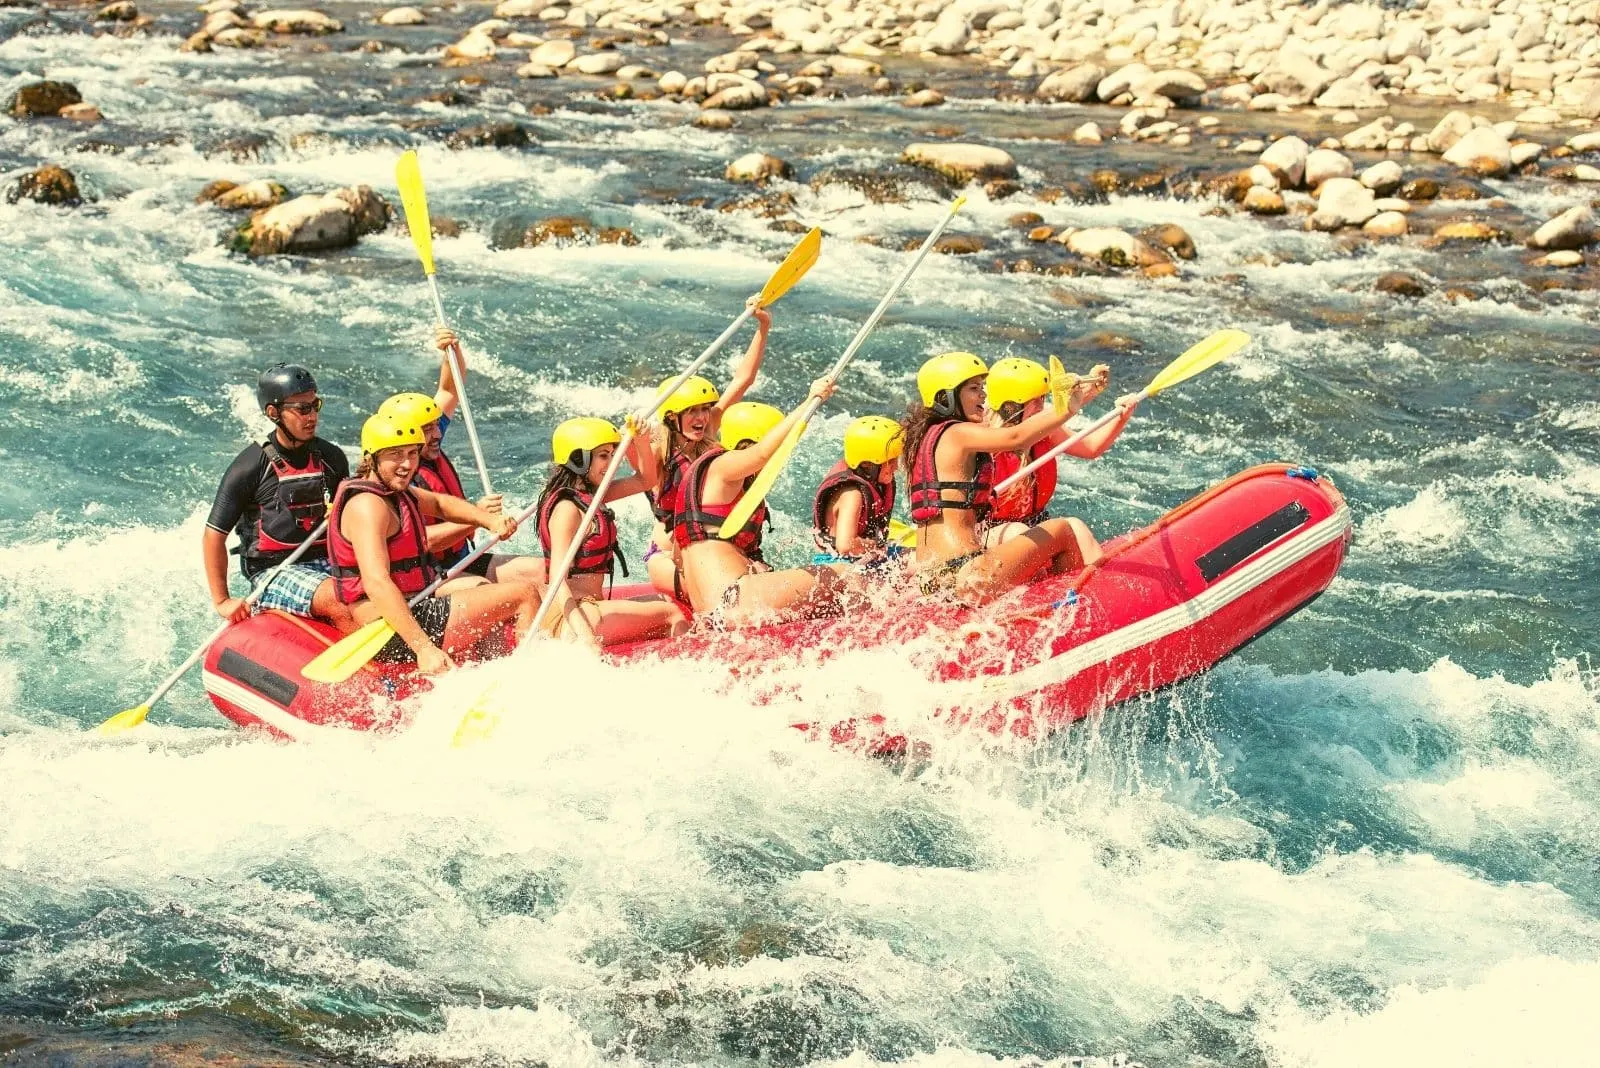 group of people enjoying the white water rafting in the river